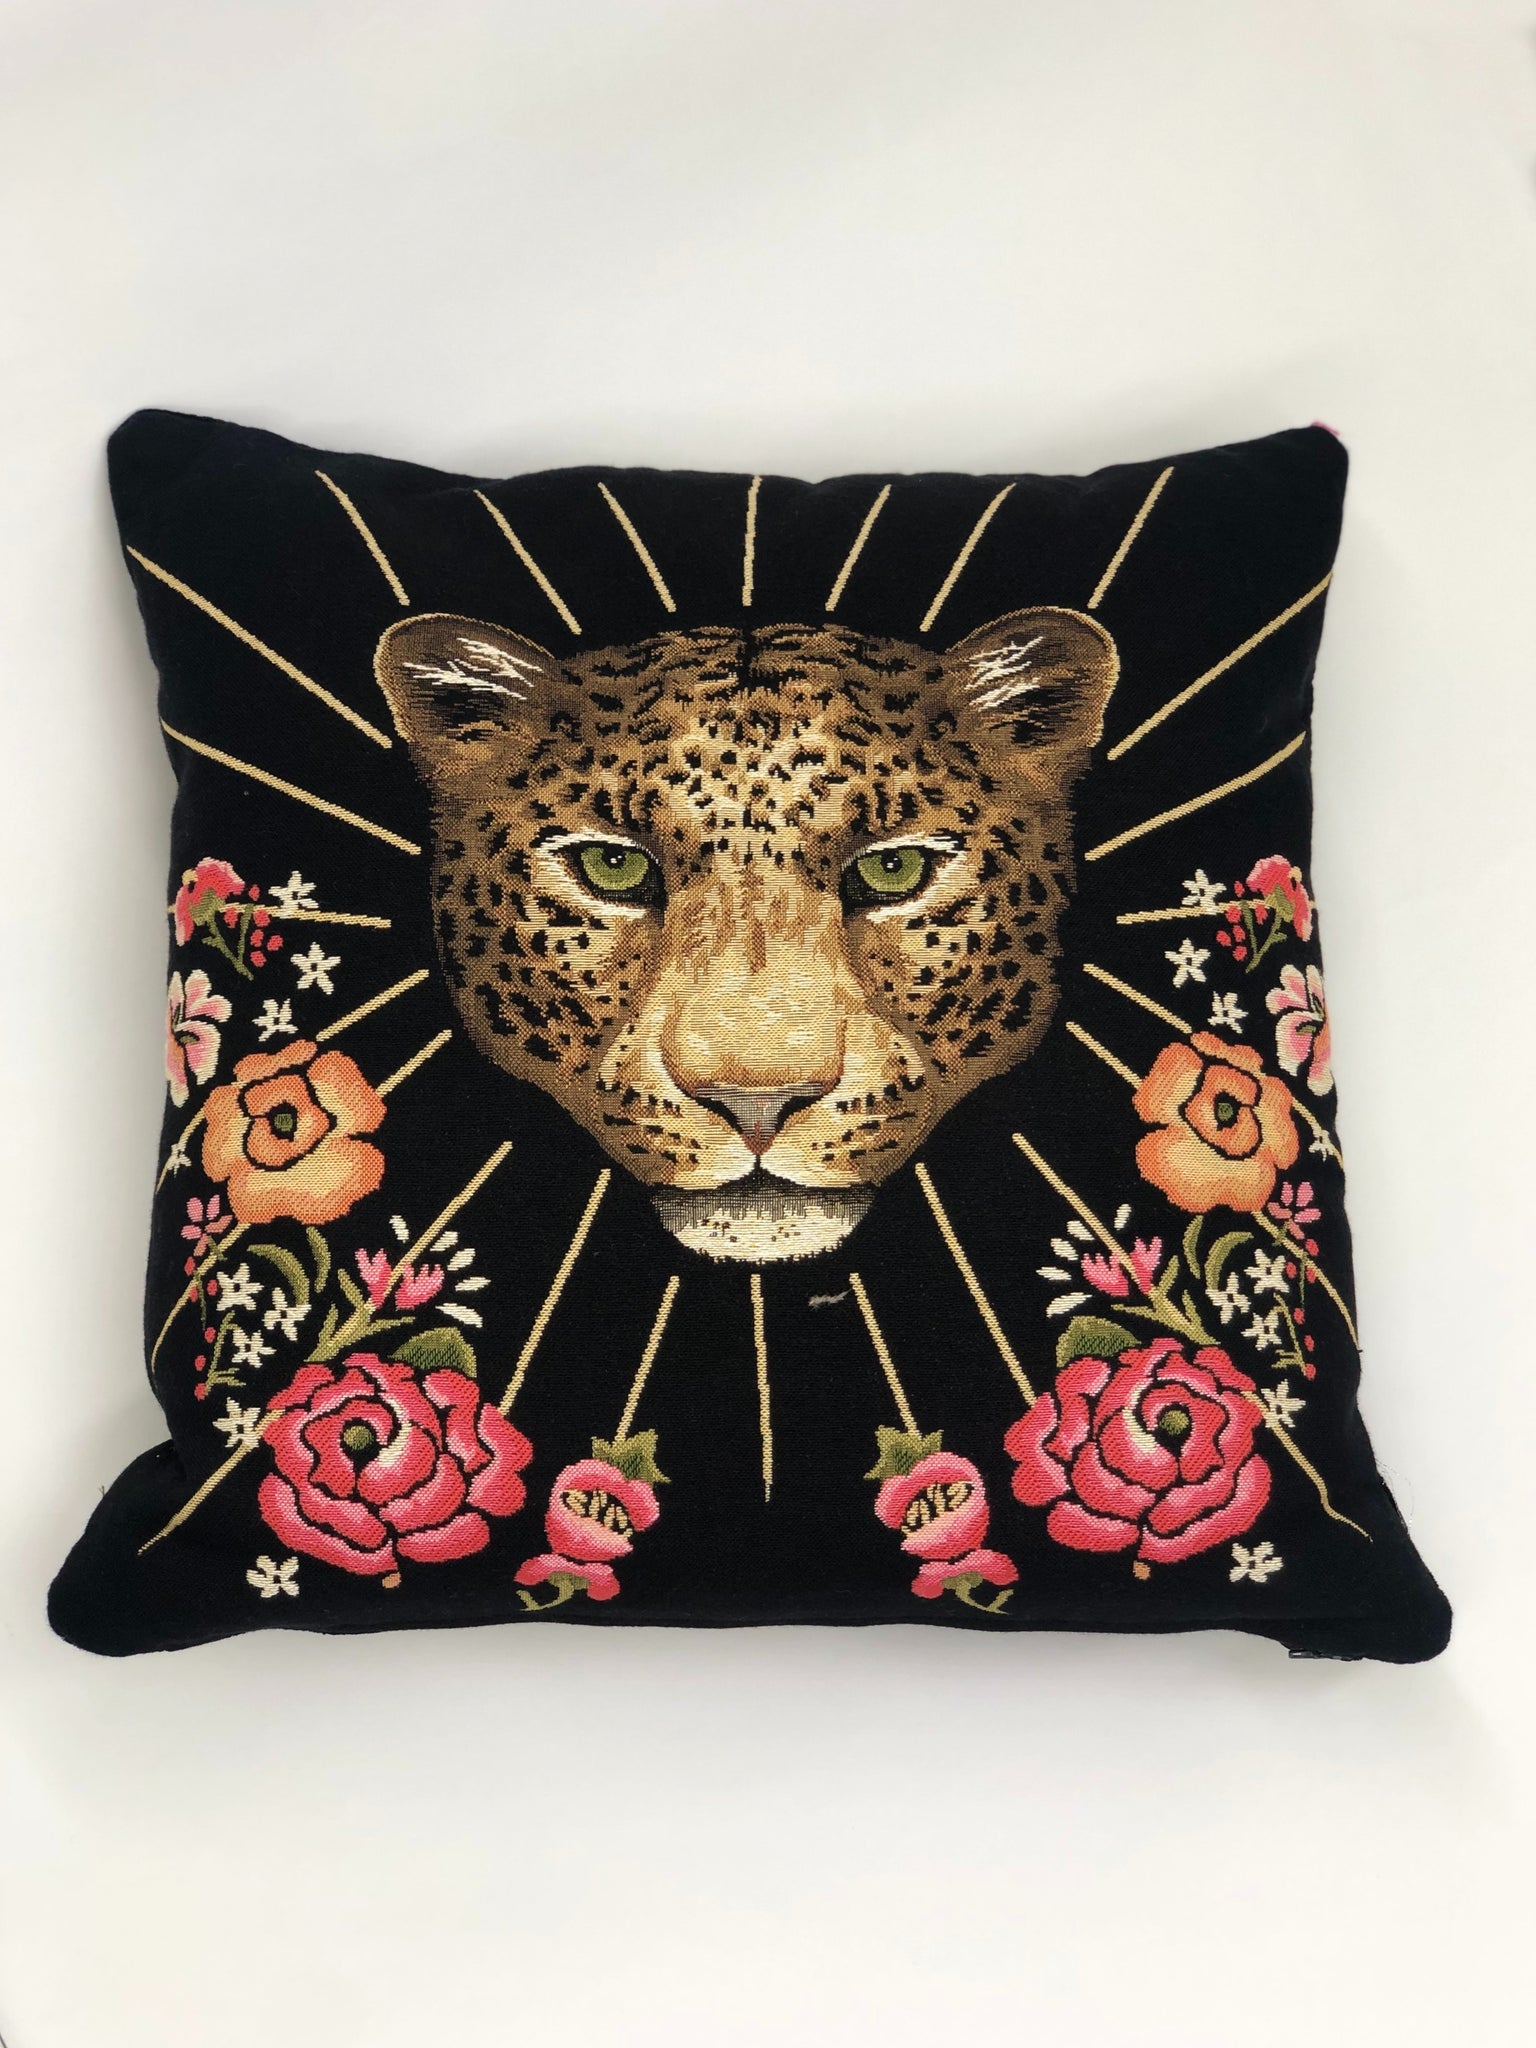 Tiger & Flowers On a Cushion